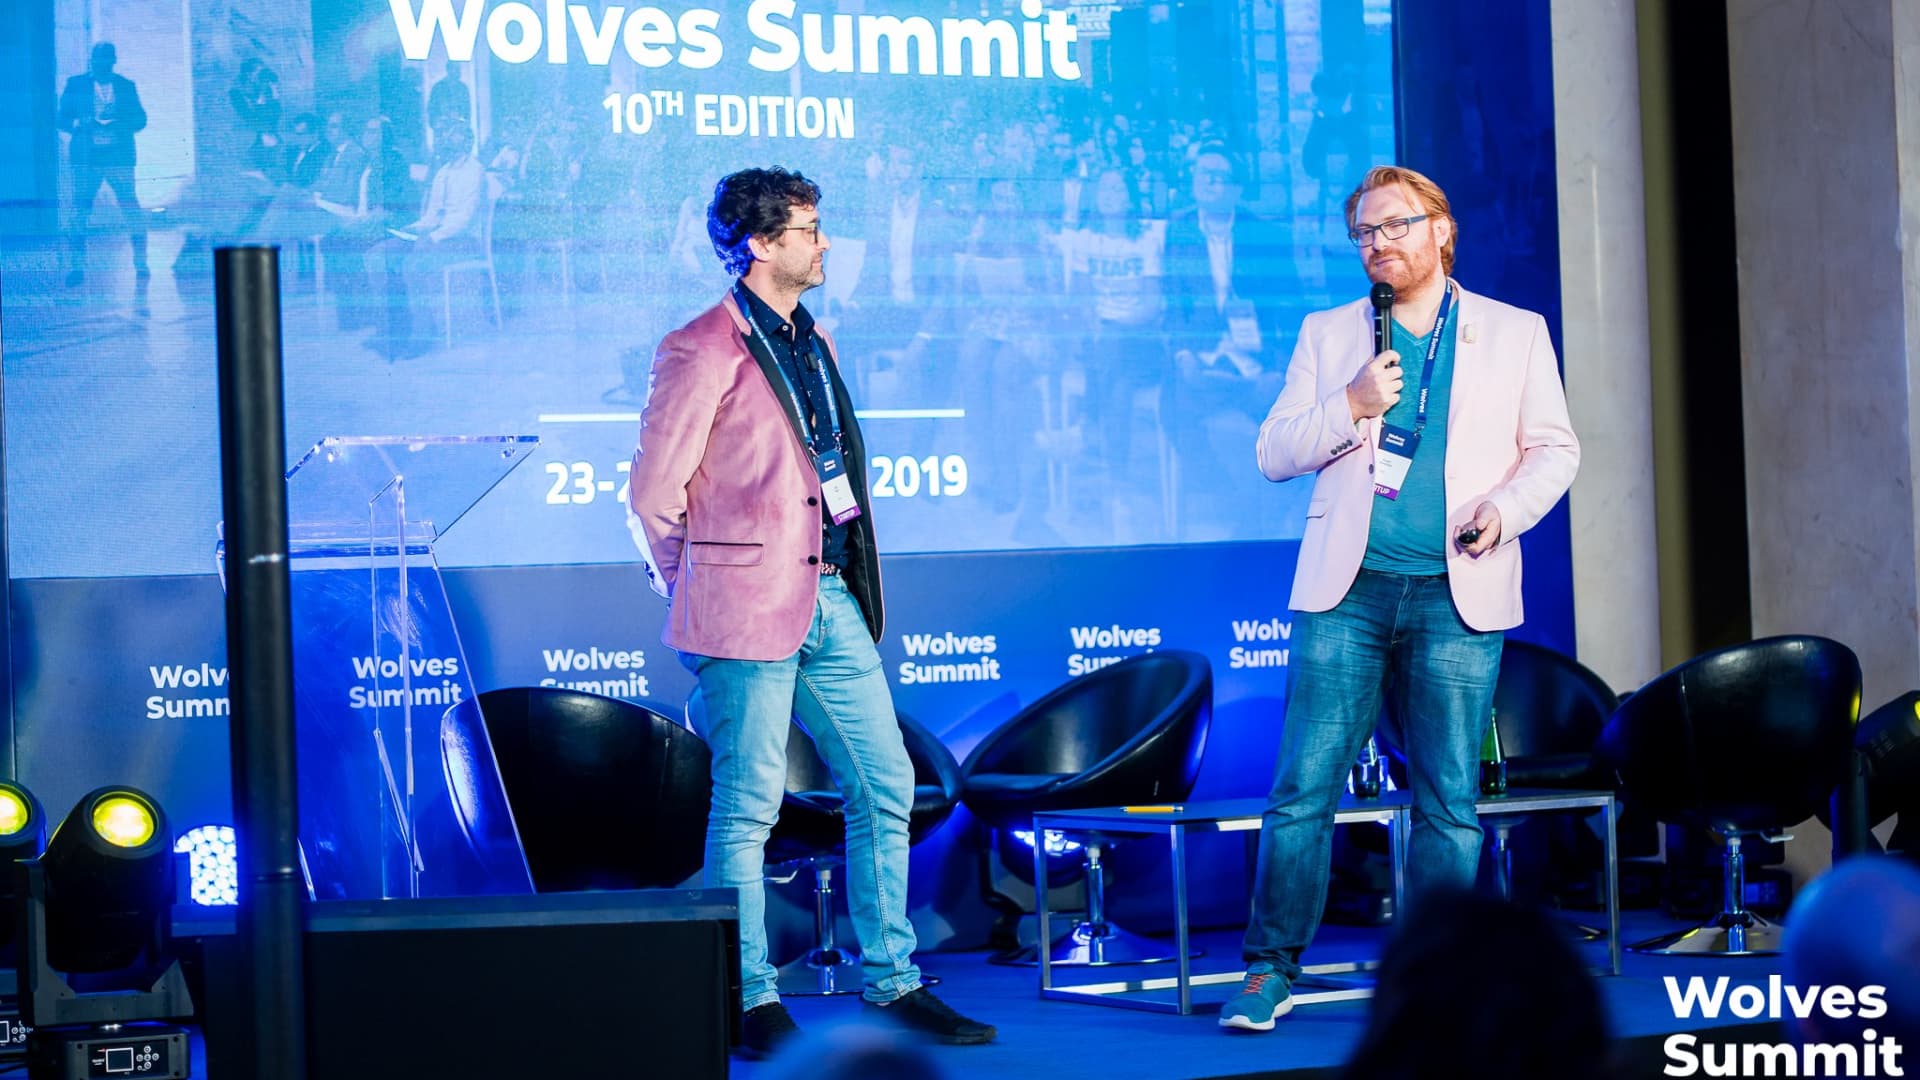 Pynk co-founders Seth Ward and Rupert Barksfield on the stage of the 10th Wolves Summit, winning their startup pitch competition.